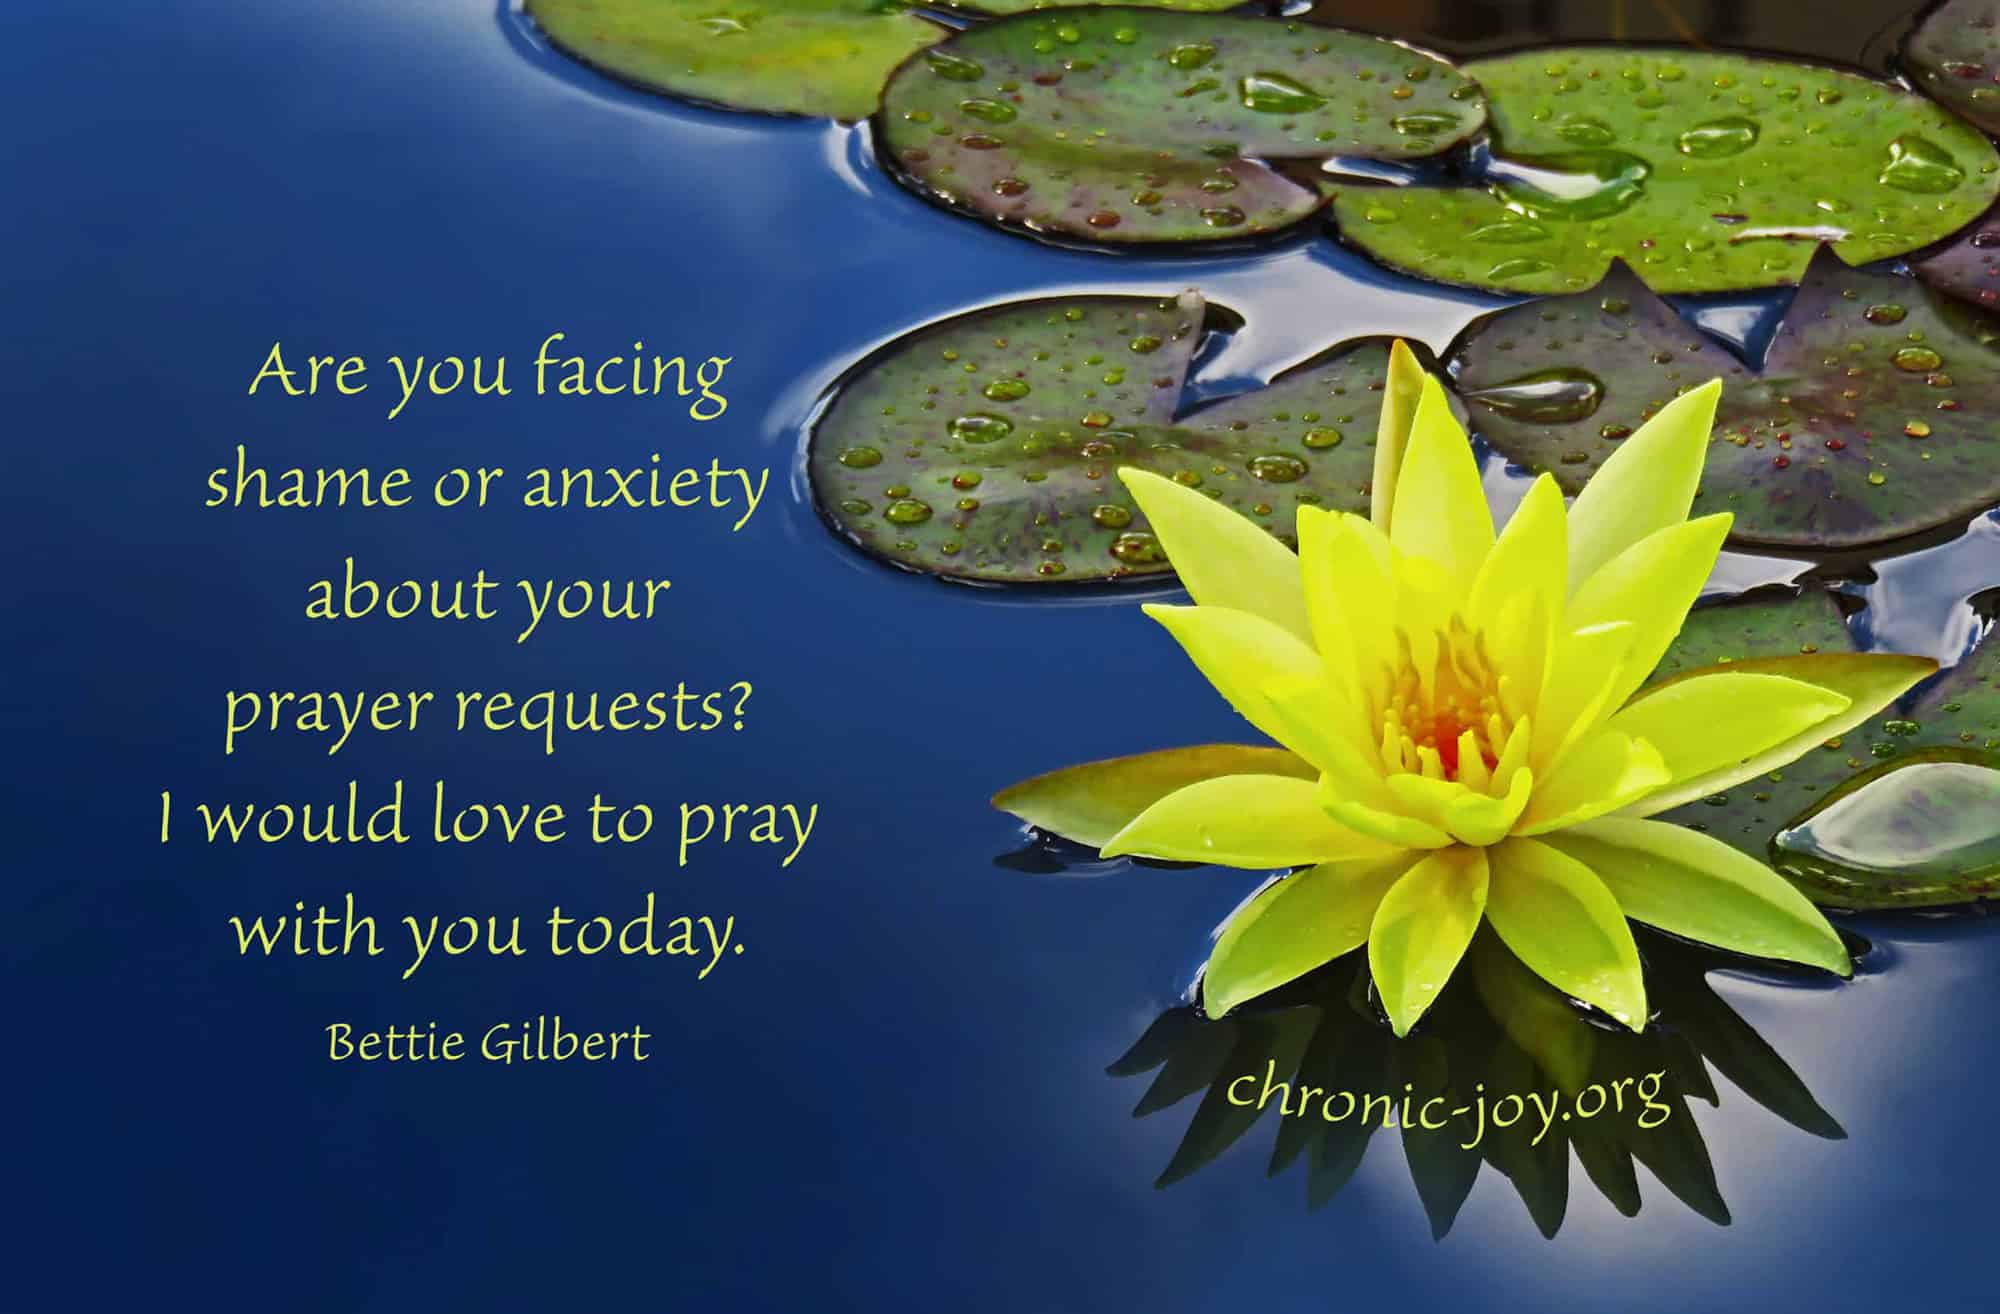 Are you facing shame or anxiety about your prayer requests?